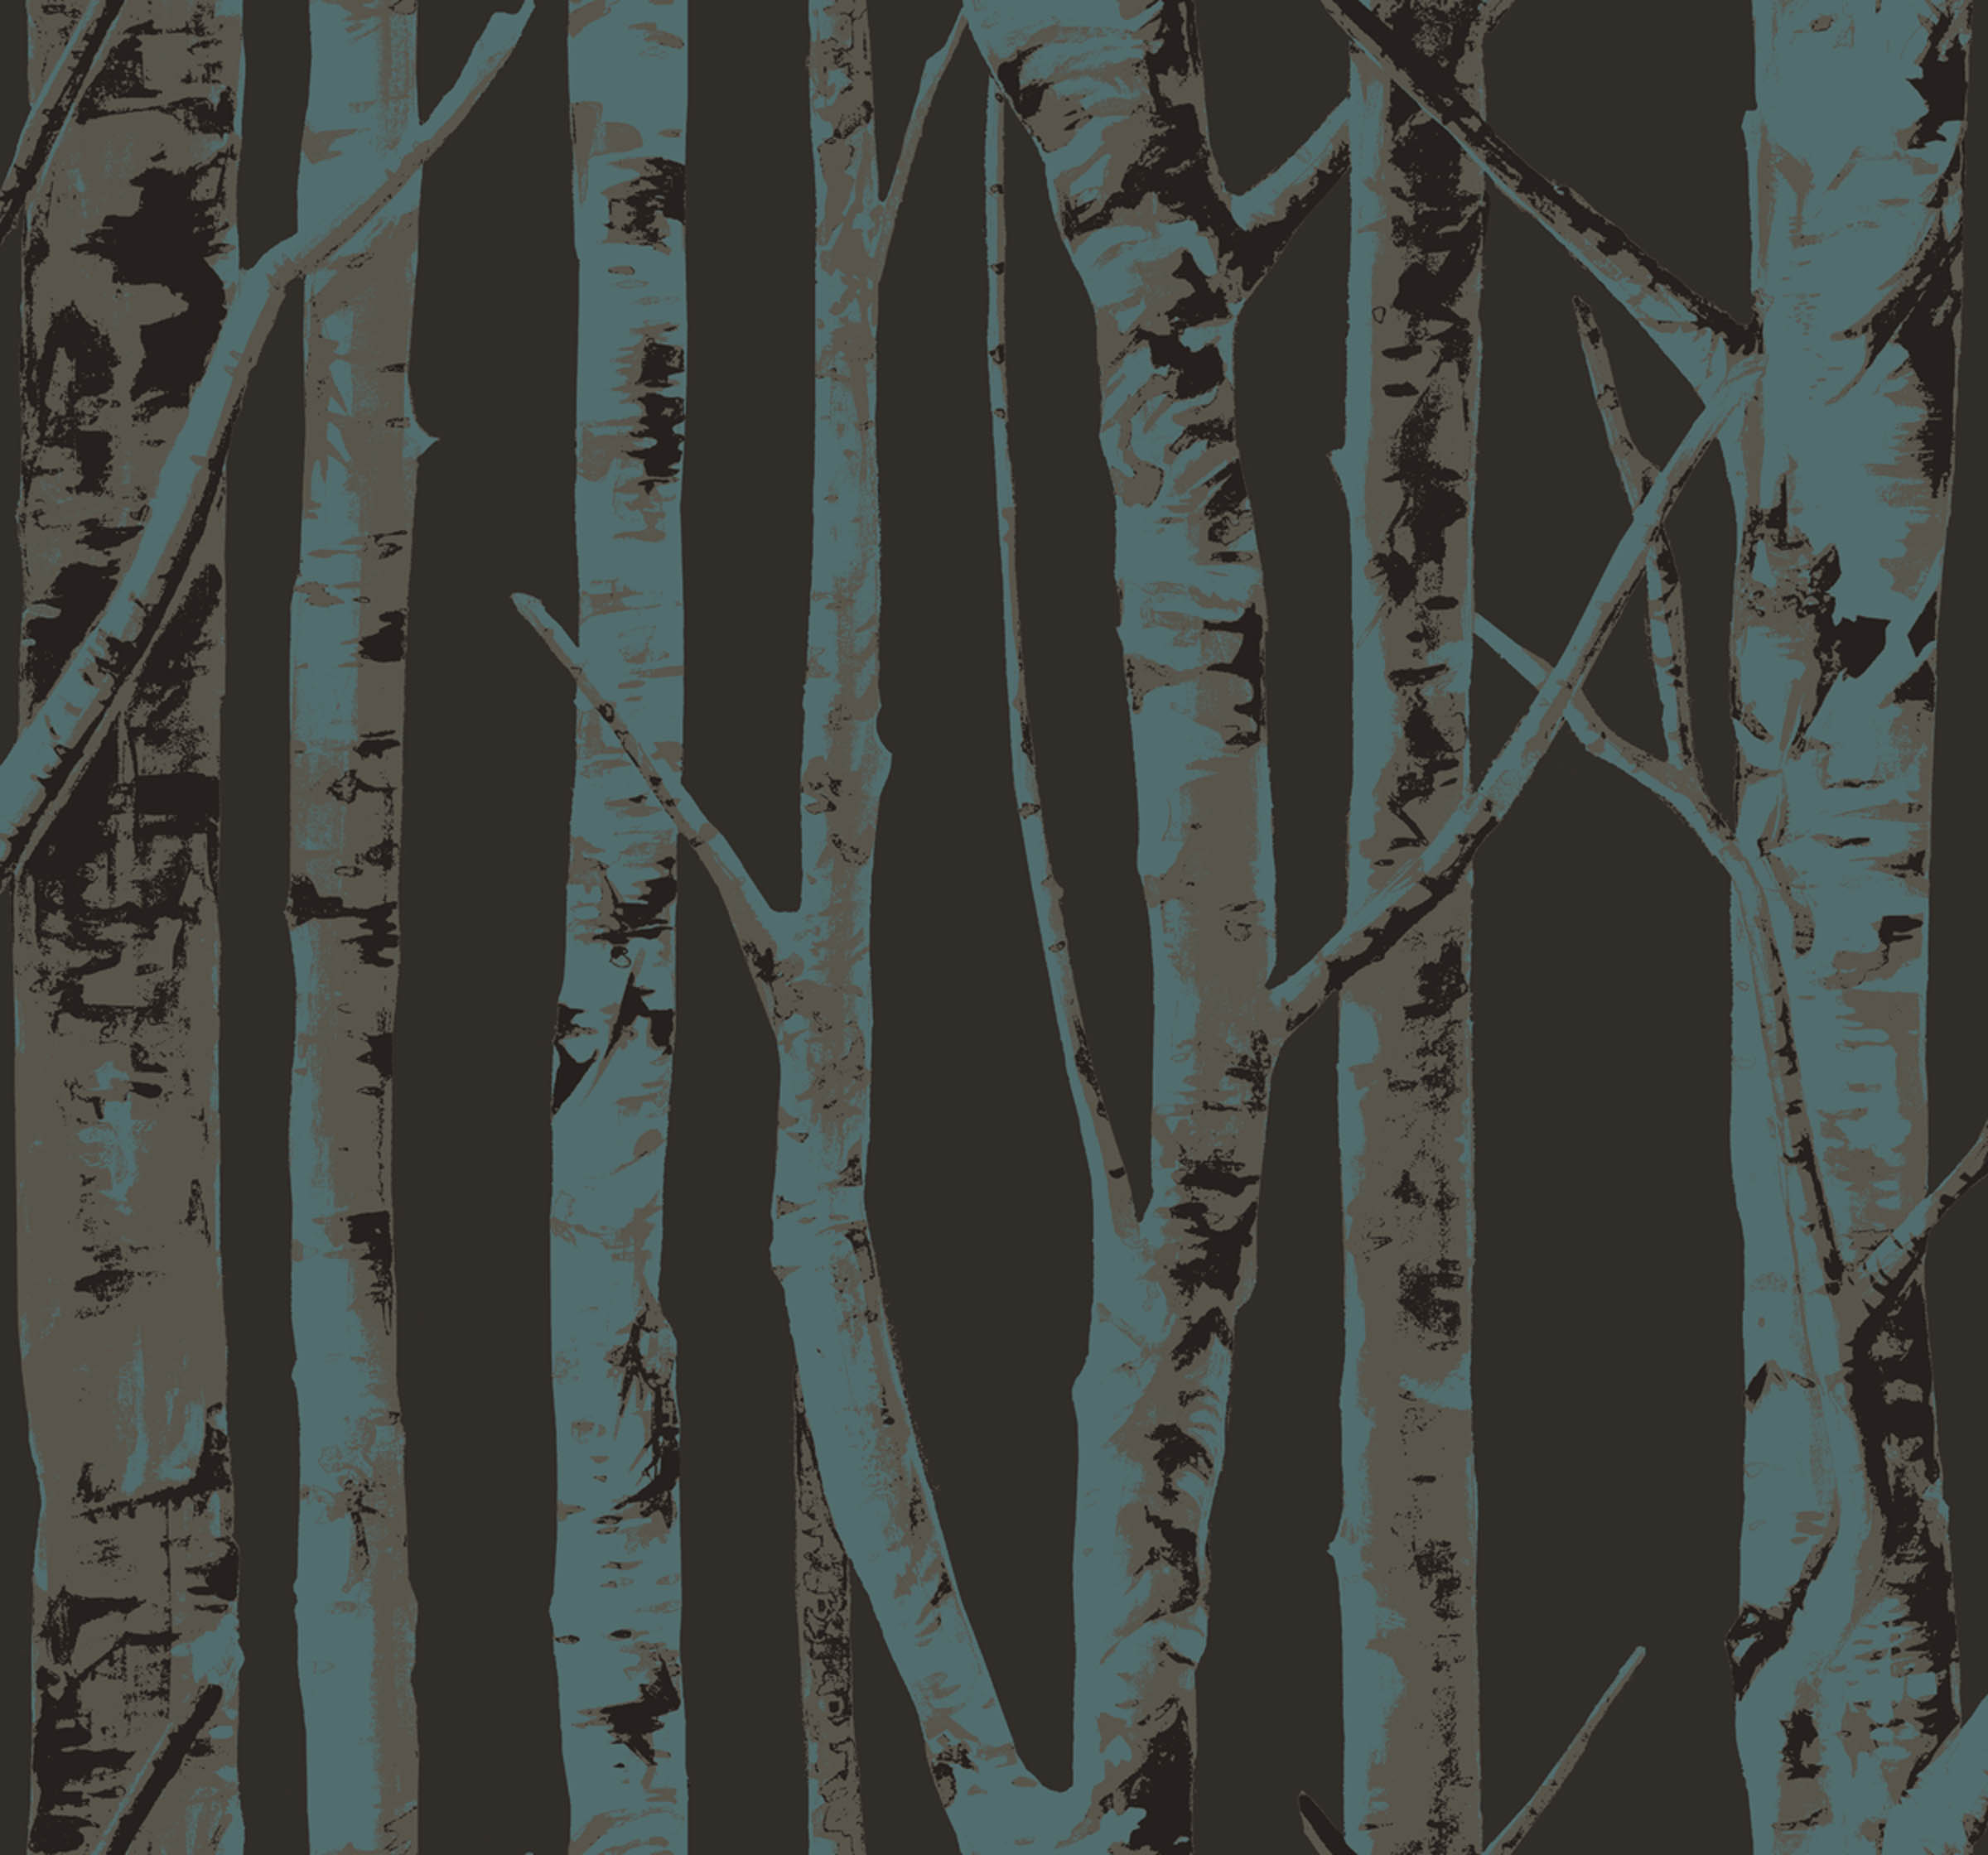  trees design from sandpiper studios eco chic wallpaper collection